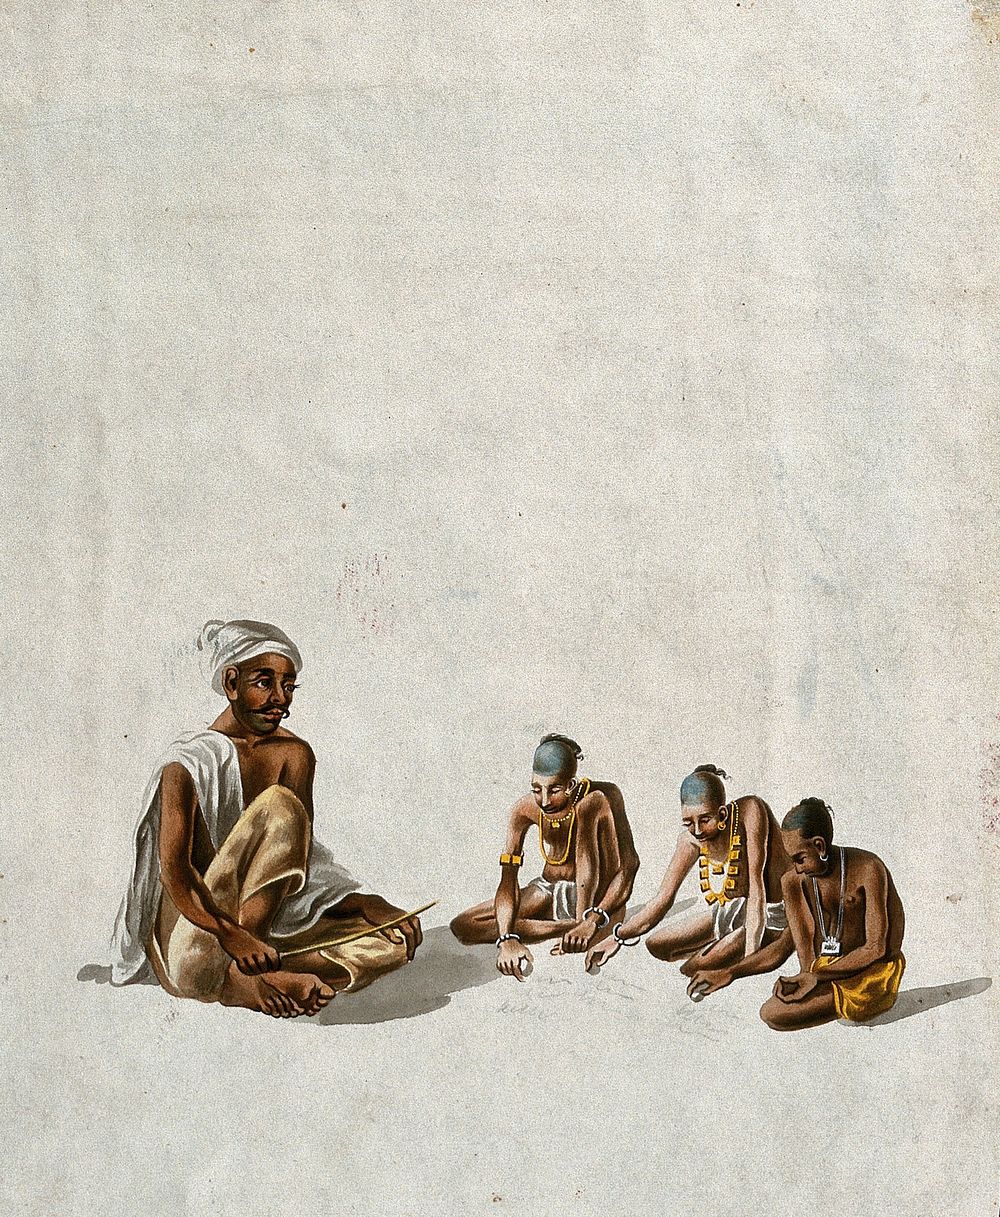 A village school; a teacher giving lessons to three children. Gouache painting by an Indian artist.